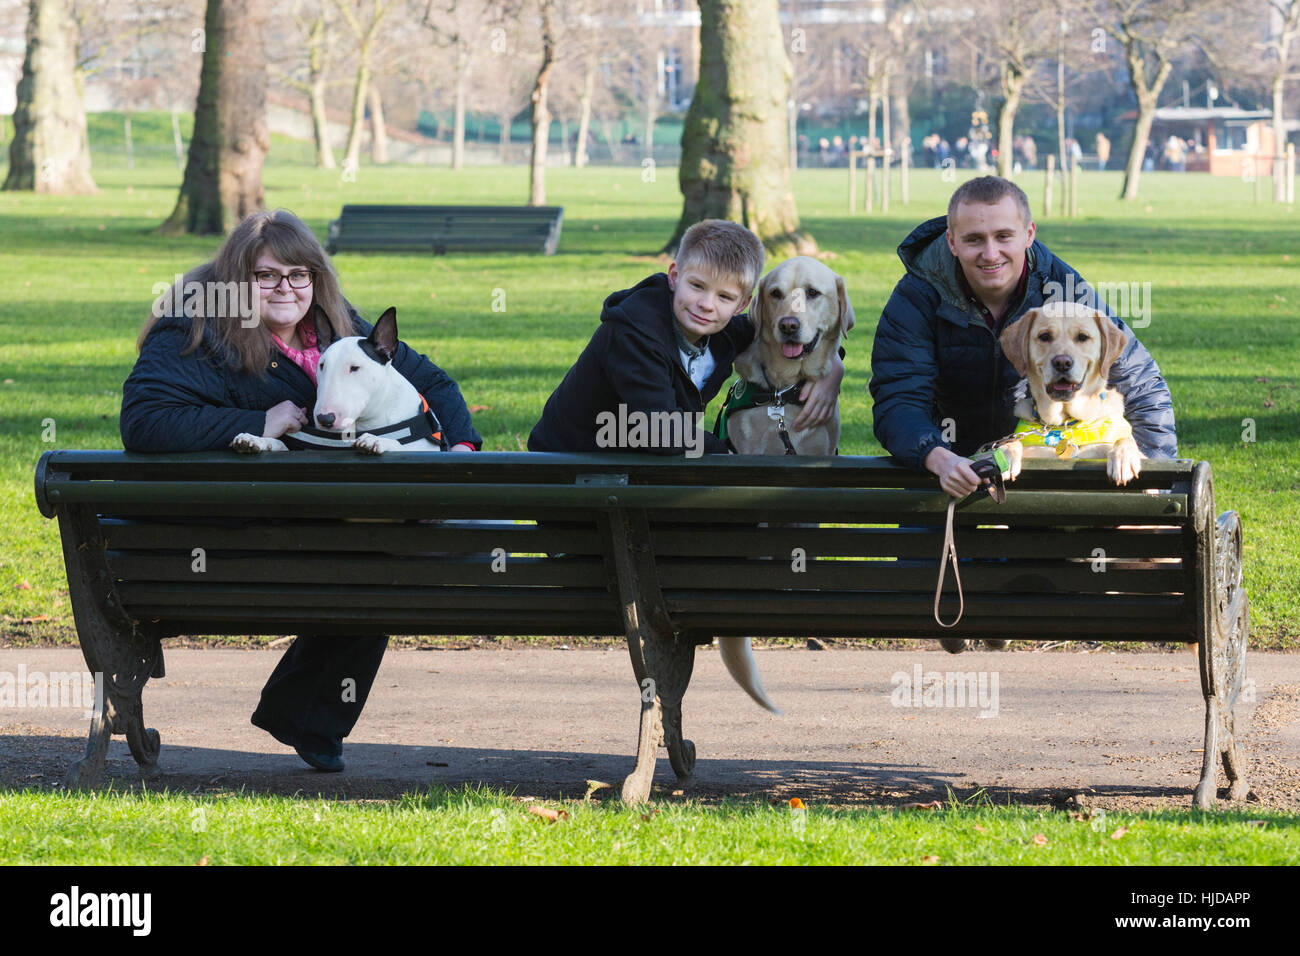 London, UK. 24th Jan, 2017. L-R: Bowser, the Bull Terrier, with owner Sally Degan, 26, from Scunthorpe, Lincs, Caddie the Labrador Retriever autism awareness dog with owner Joel Sayer, 13, from Newquay, Cornwall, Hudson, the Labrador Retriever guide dog with owner Nathan Edge, 22, from North Hykeham, Lincs. The Kennel Club and Eukanuba have selected four inspiring Hero Dogs as the 2017 finalists. They forward to the public vote with the winner being announced at Crufts. Charlie, the Military Dog with the British Army did not attend the photocall. Credit: Vibrant Pictures/Alamy Live News Stock Photo